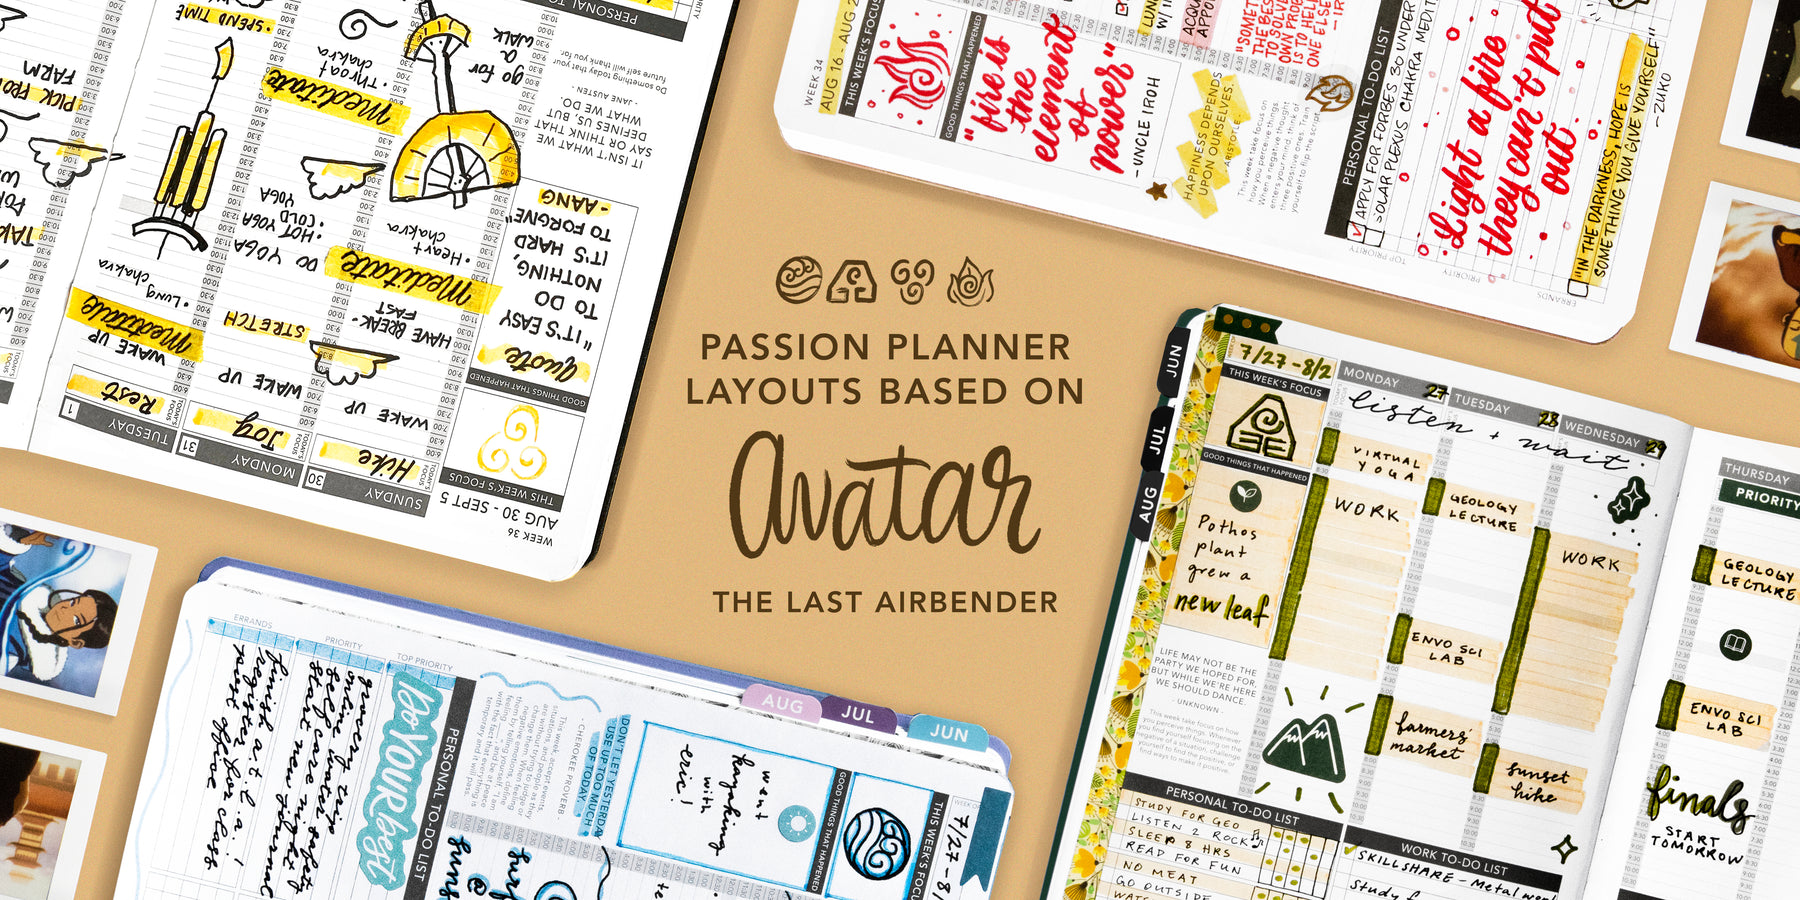 4 Passion Planner Ideas Based on Avatar: The Last Airbender